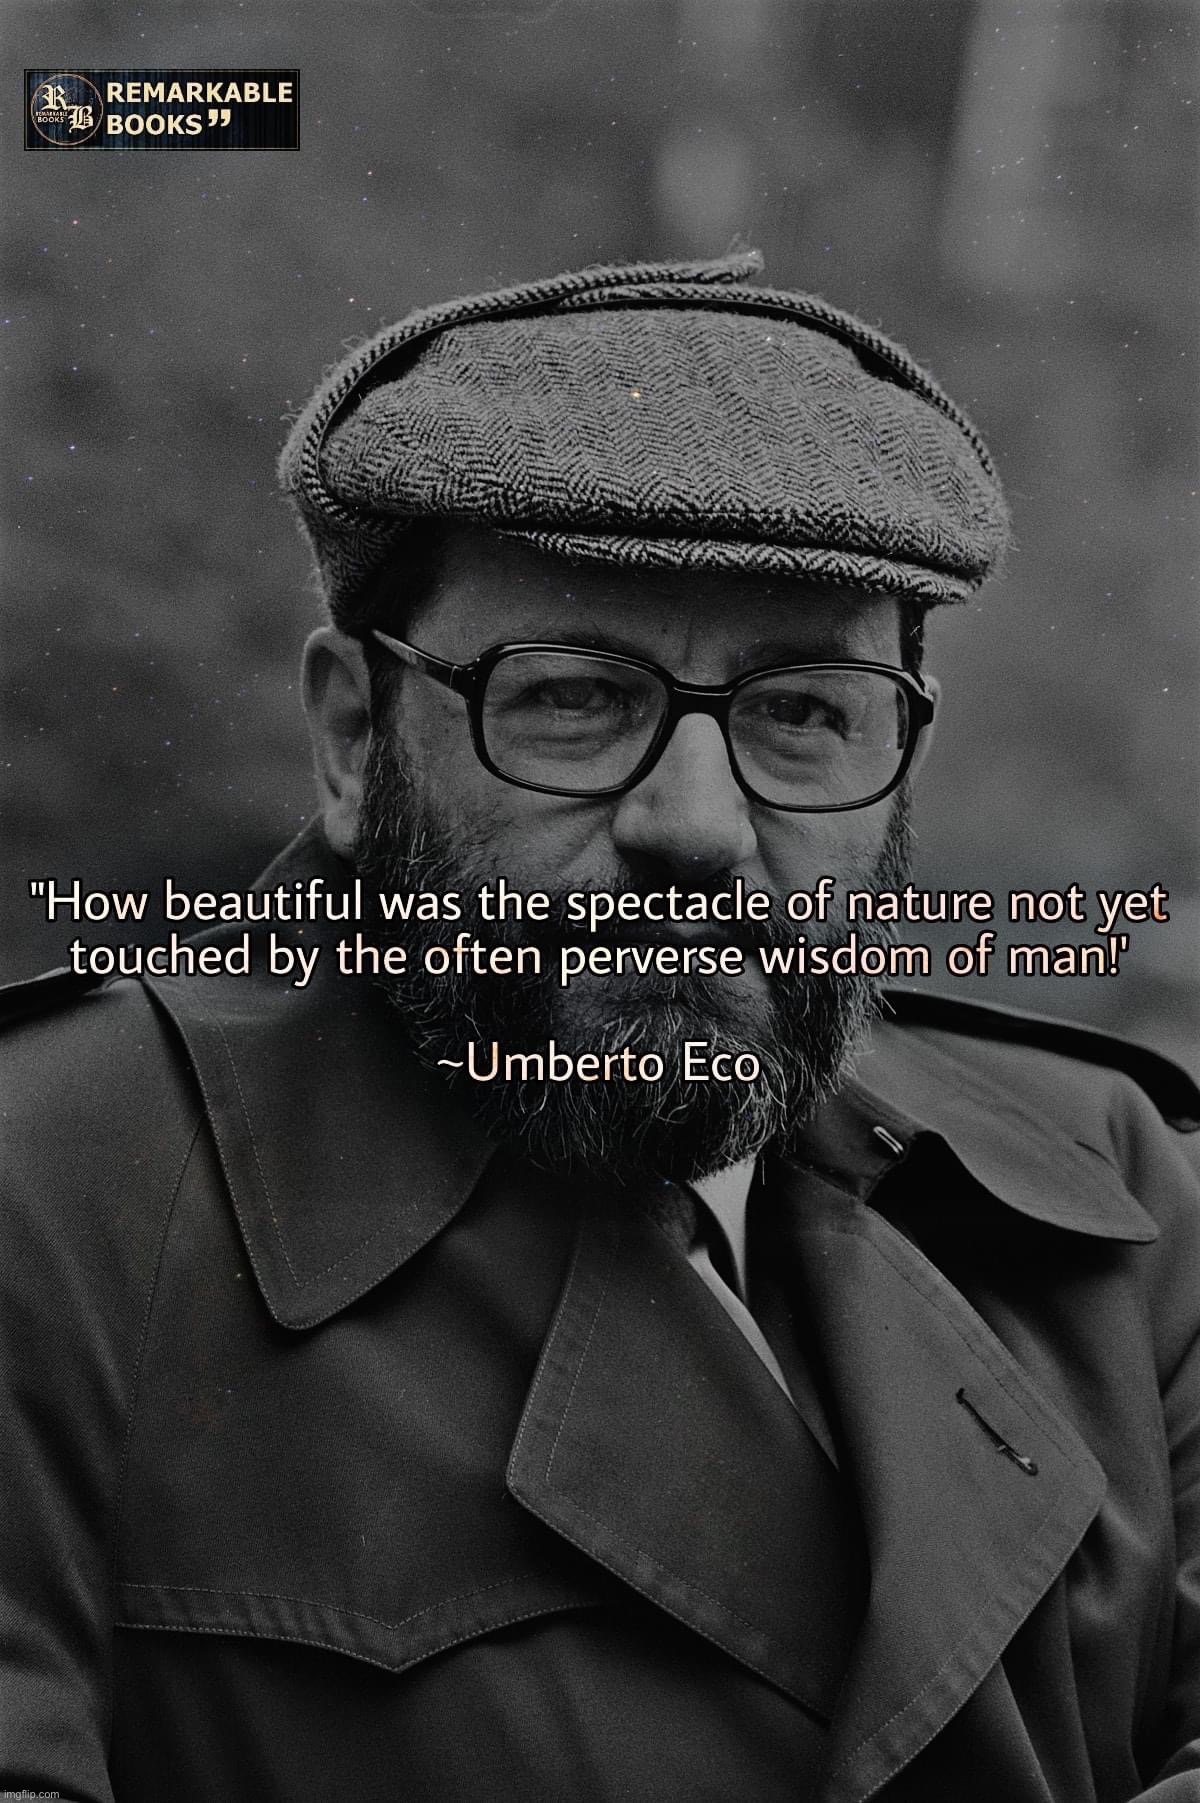 Umberto Eco quote | image tagged in umberto eco quote | made w/ Imgflip meme maker